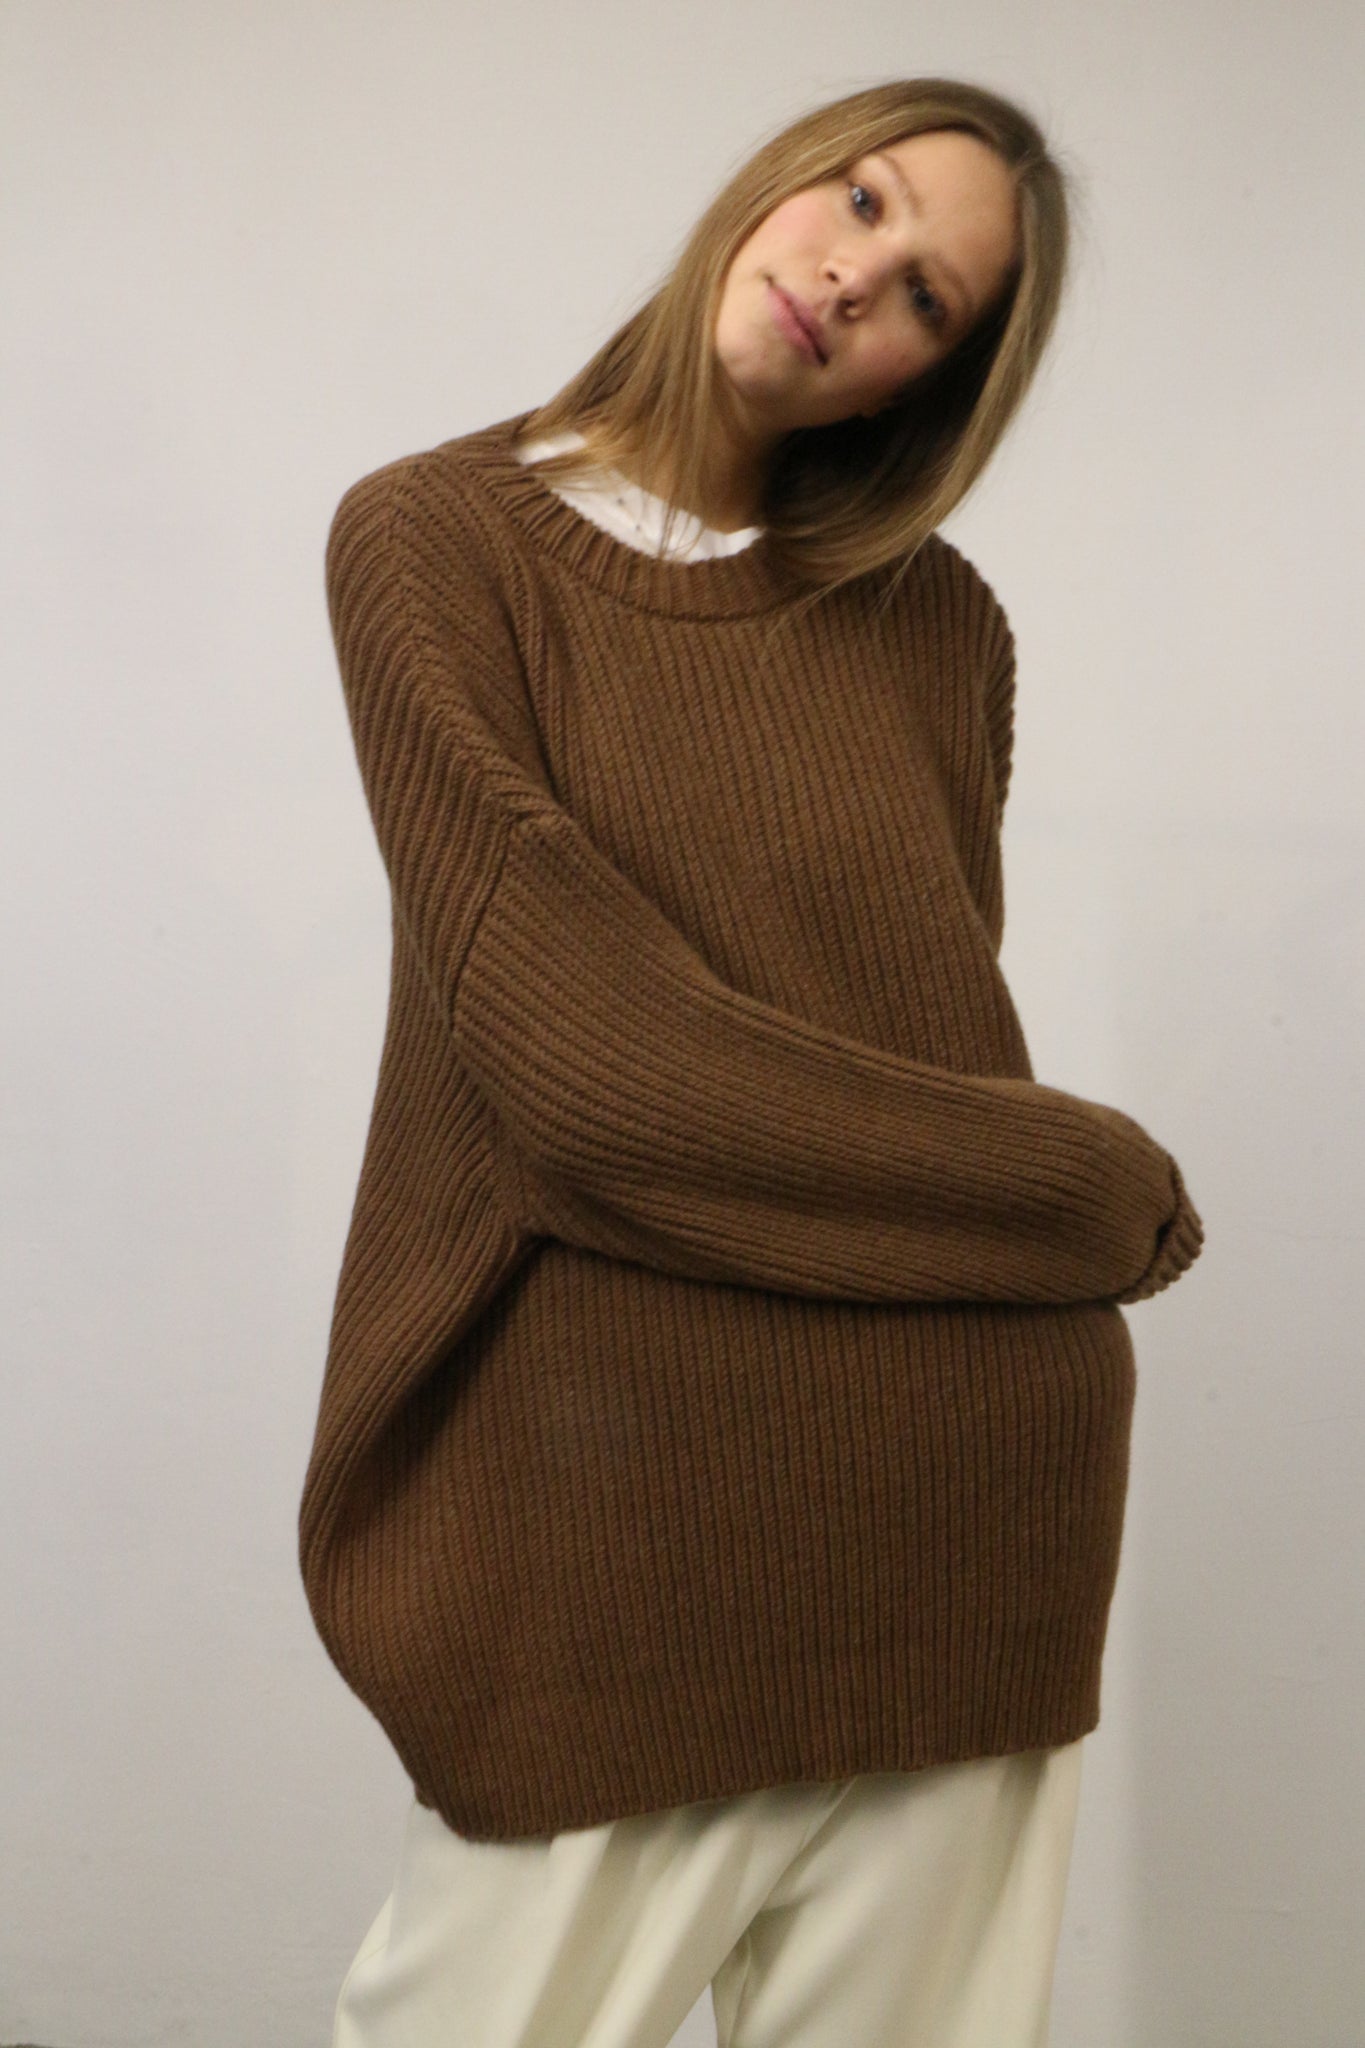 CHUNKY UNISEX KNIT PULLOVER IN BROWN BY CAN PEP REY